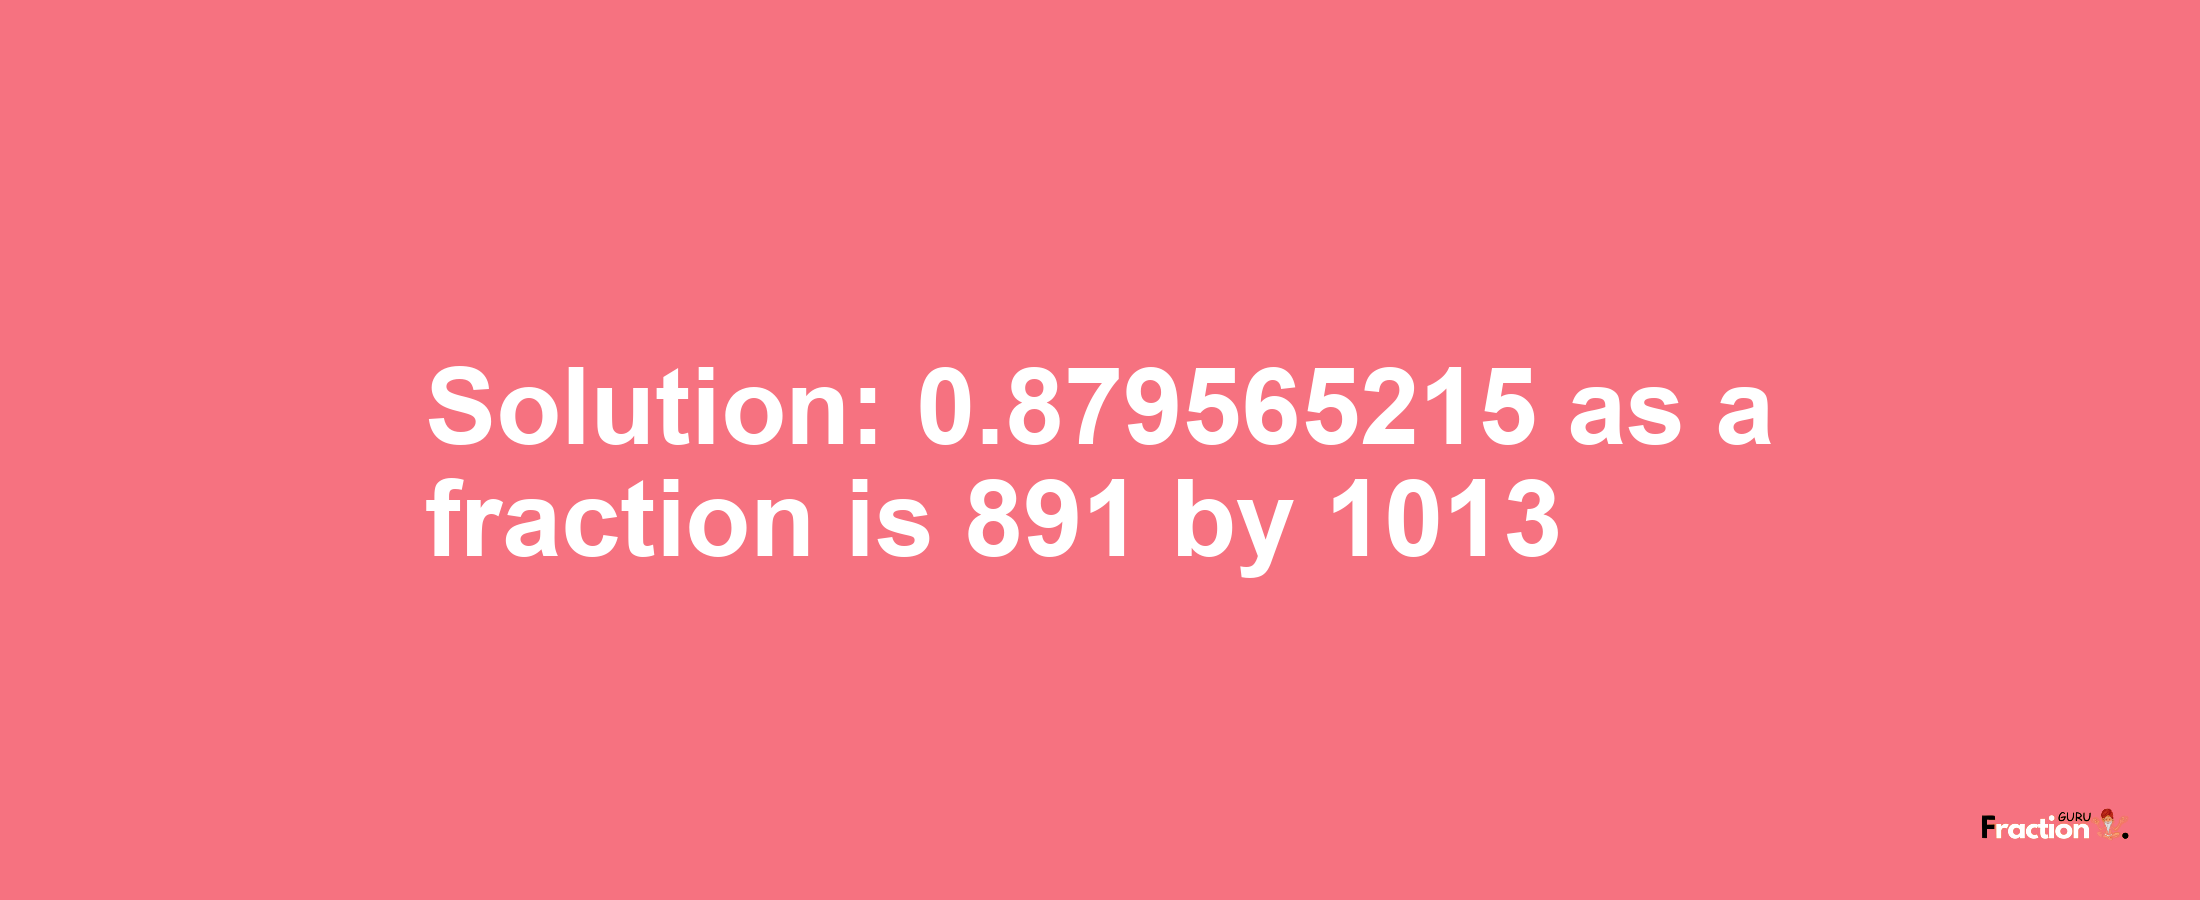 Solution:0.879565215 as a fraction is 891/1013